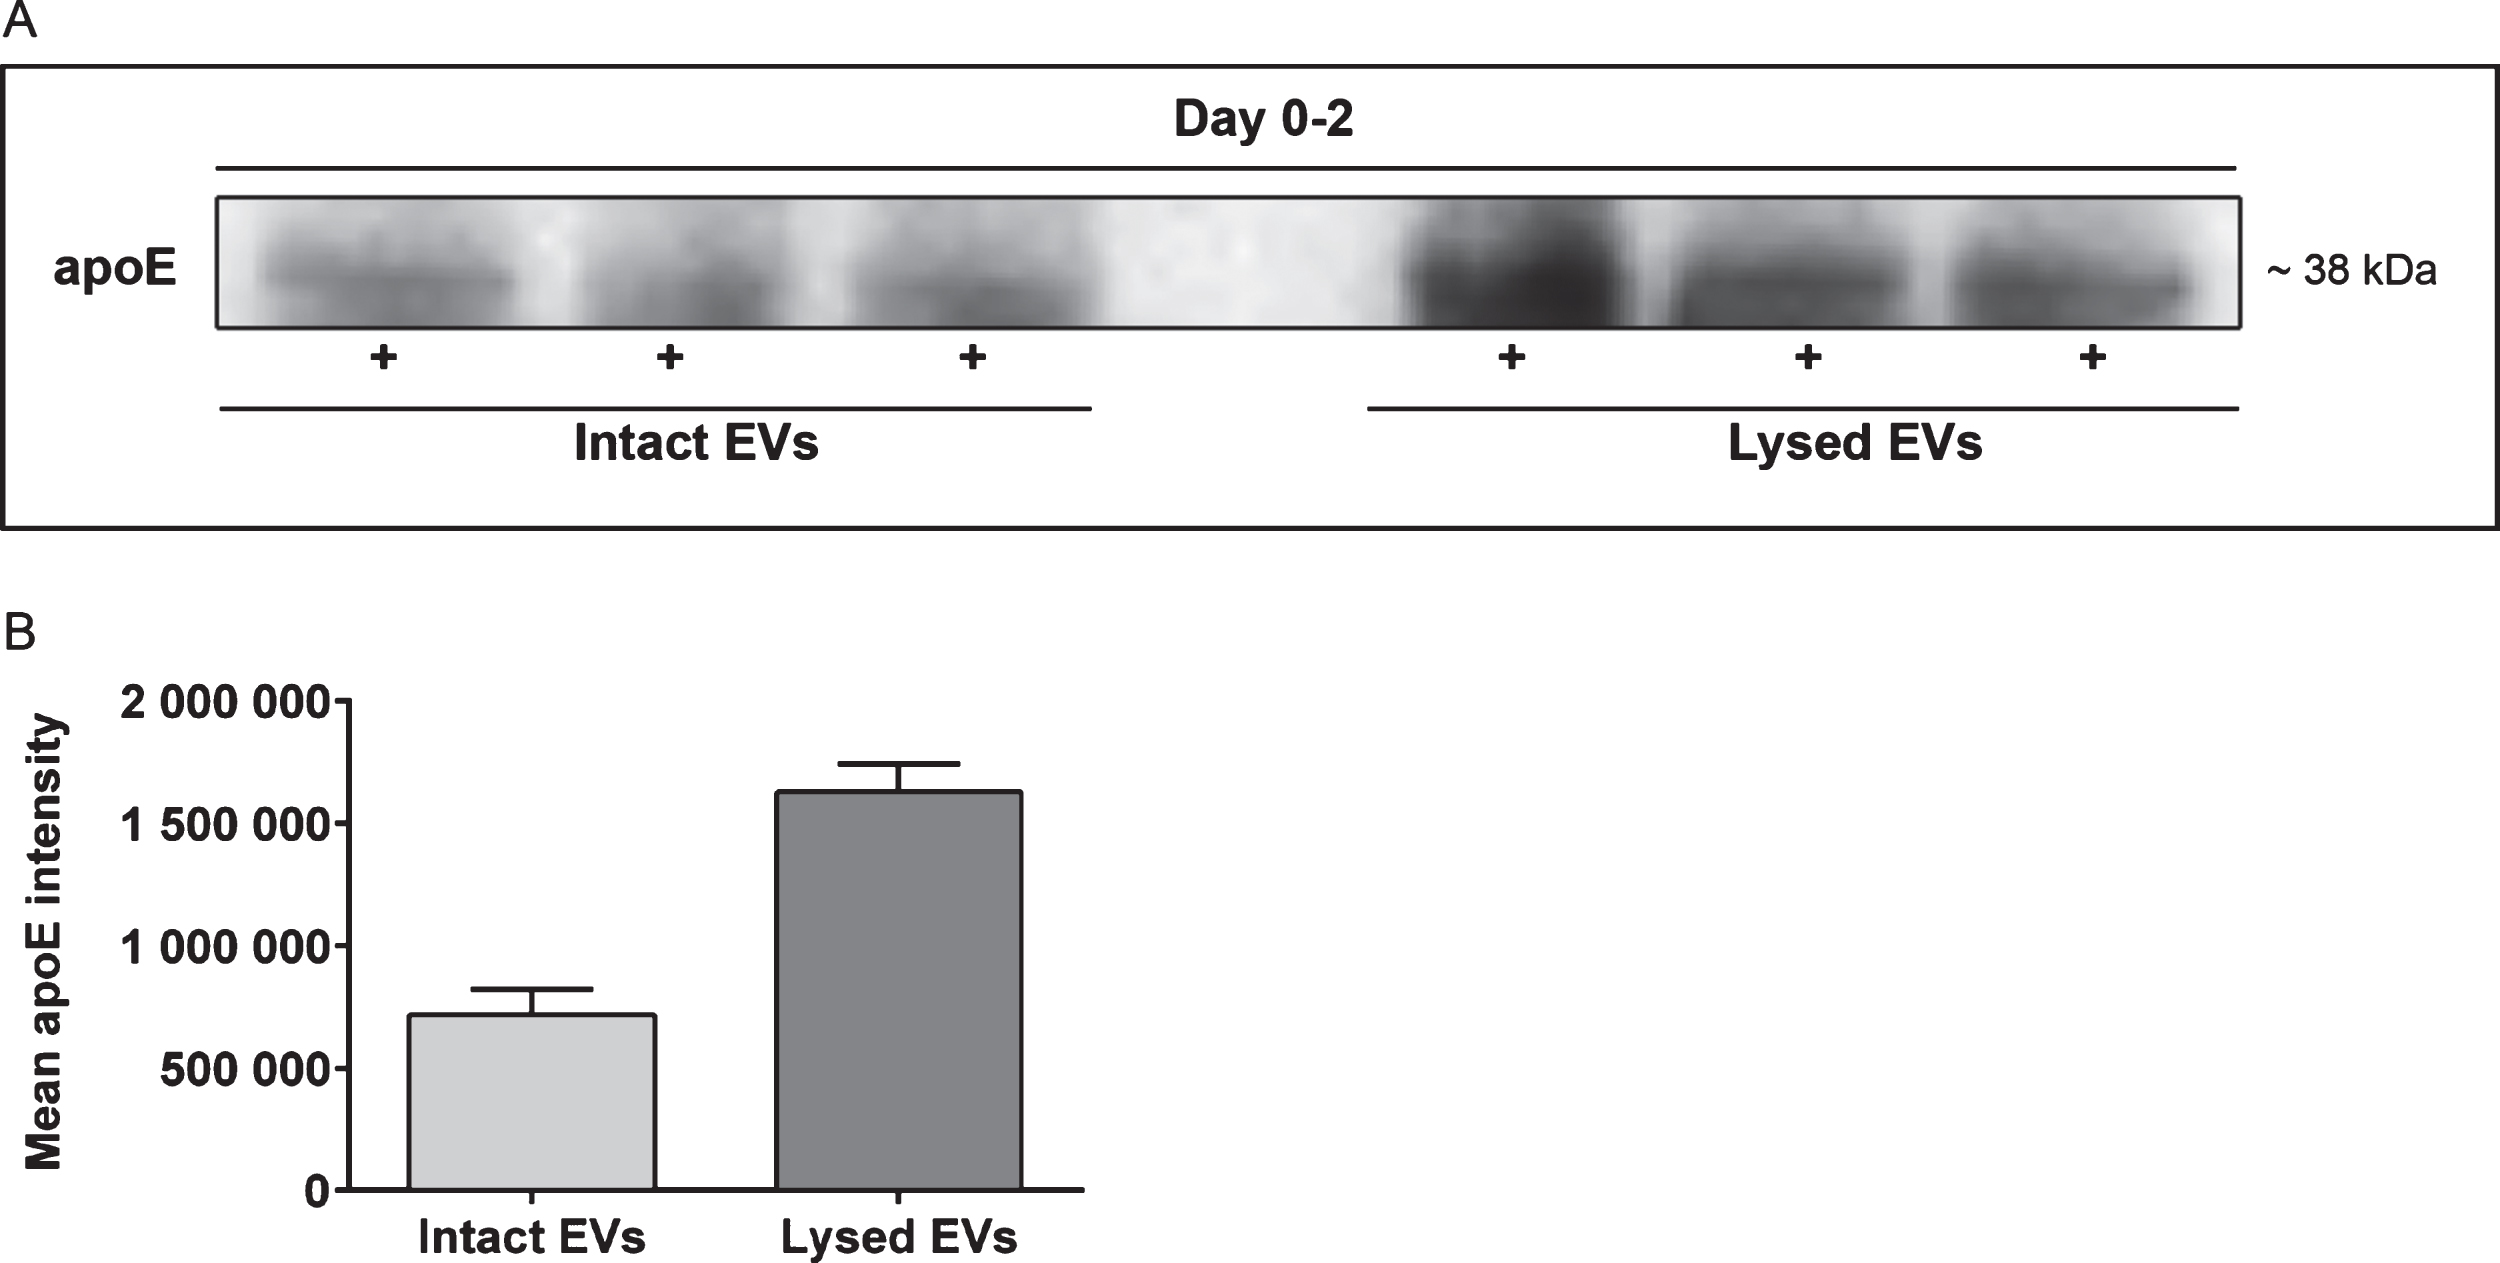 Apolipoprotein E is primarily situated inside isolated EVs. Immunoprecipitation was performed to confirm the presence of apoE inside the EVs. Following ultracentrifugation, EVs were either resuspended in PBS (intact EVs) or lysis buffer with protease inhibitors (lysed EVs) and immunoprecipitated with apoE antibodies. Western blot analysis from day 0–2 revealed twice as much apoE in the lysed EV samples, compared to the samples with intact EVs (A). The mean apoE intensity was 7.2E5±1.1E5 and 16.3E5±1.2E5 for intact EVs and lysed EVs, respectively (B). The data is from three independent cell culture experiments.